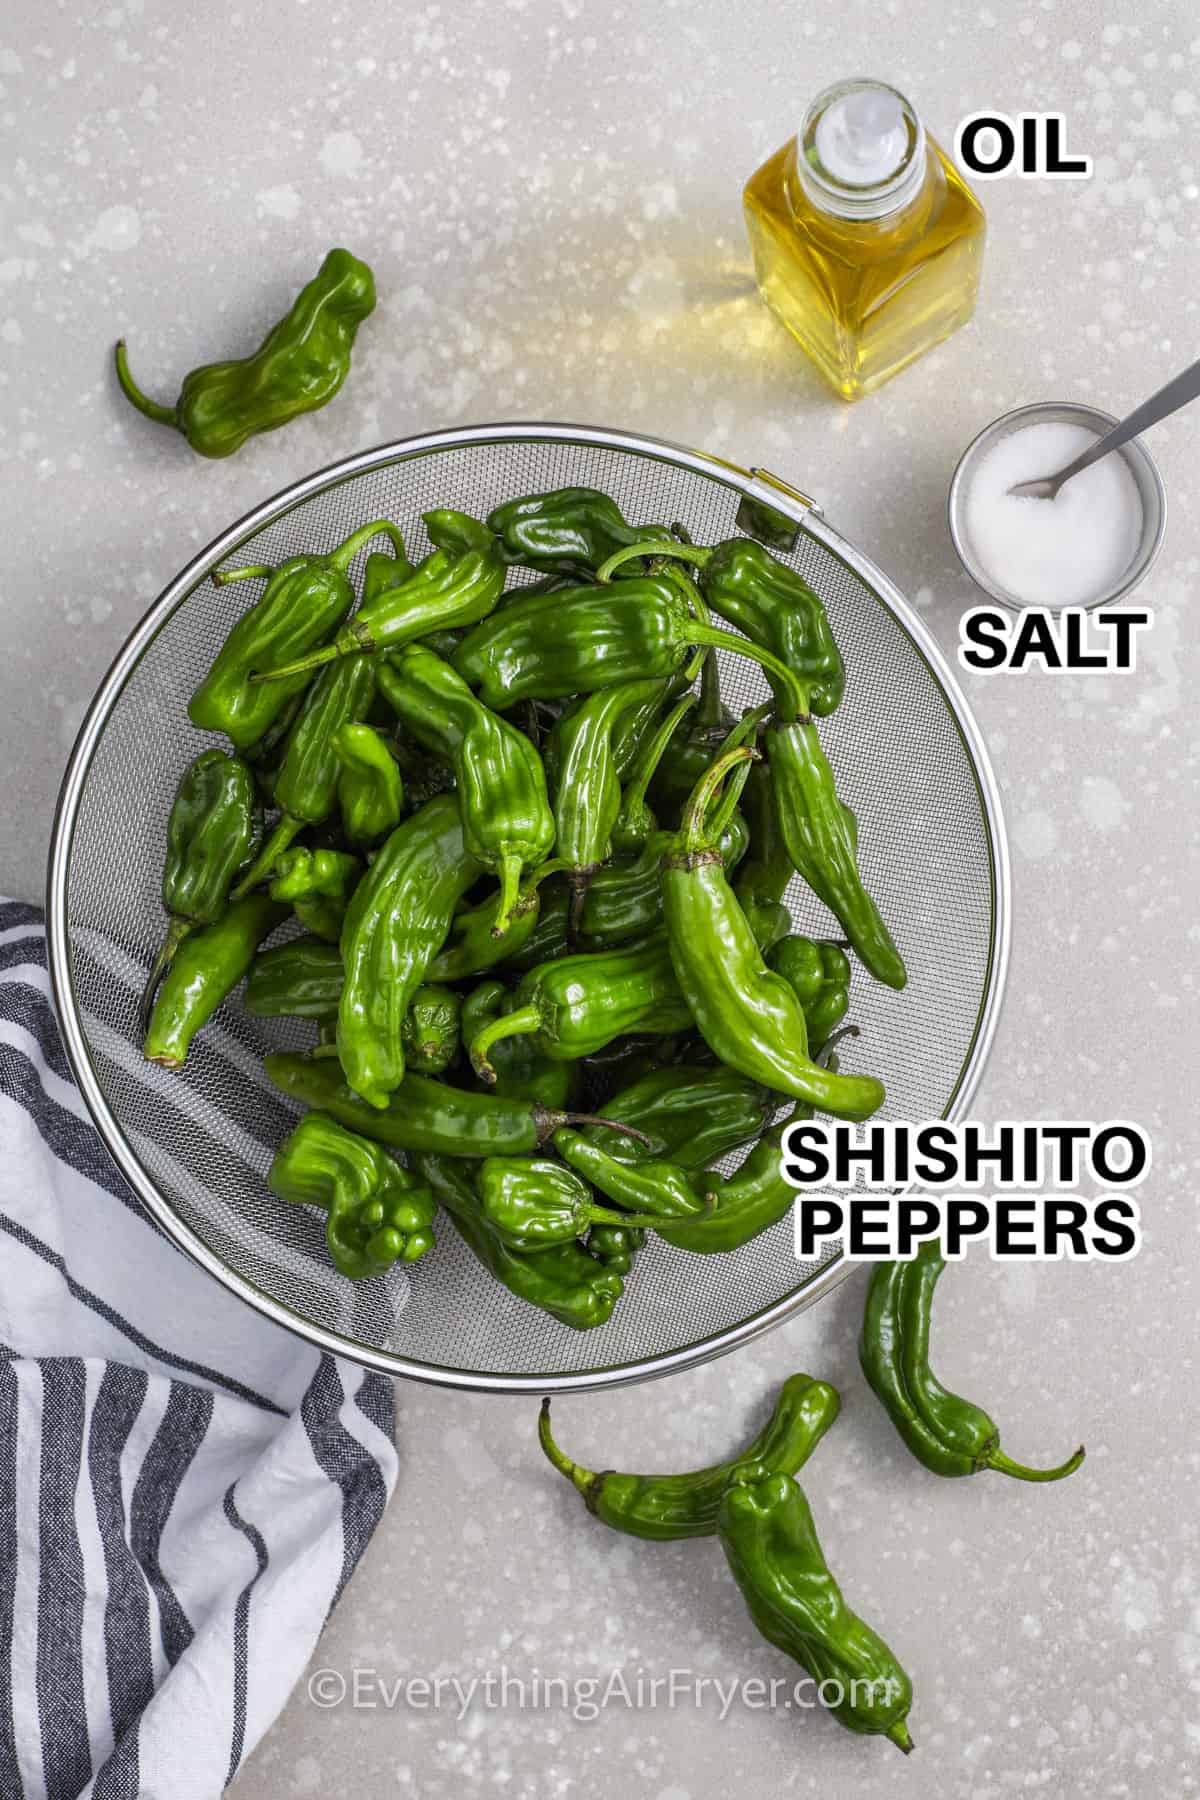 shishito peppers, salt and oil with labels to make Air Fryer Shishito Peppers